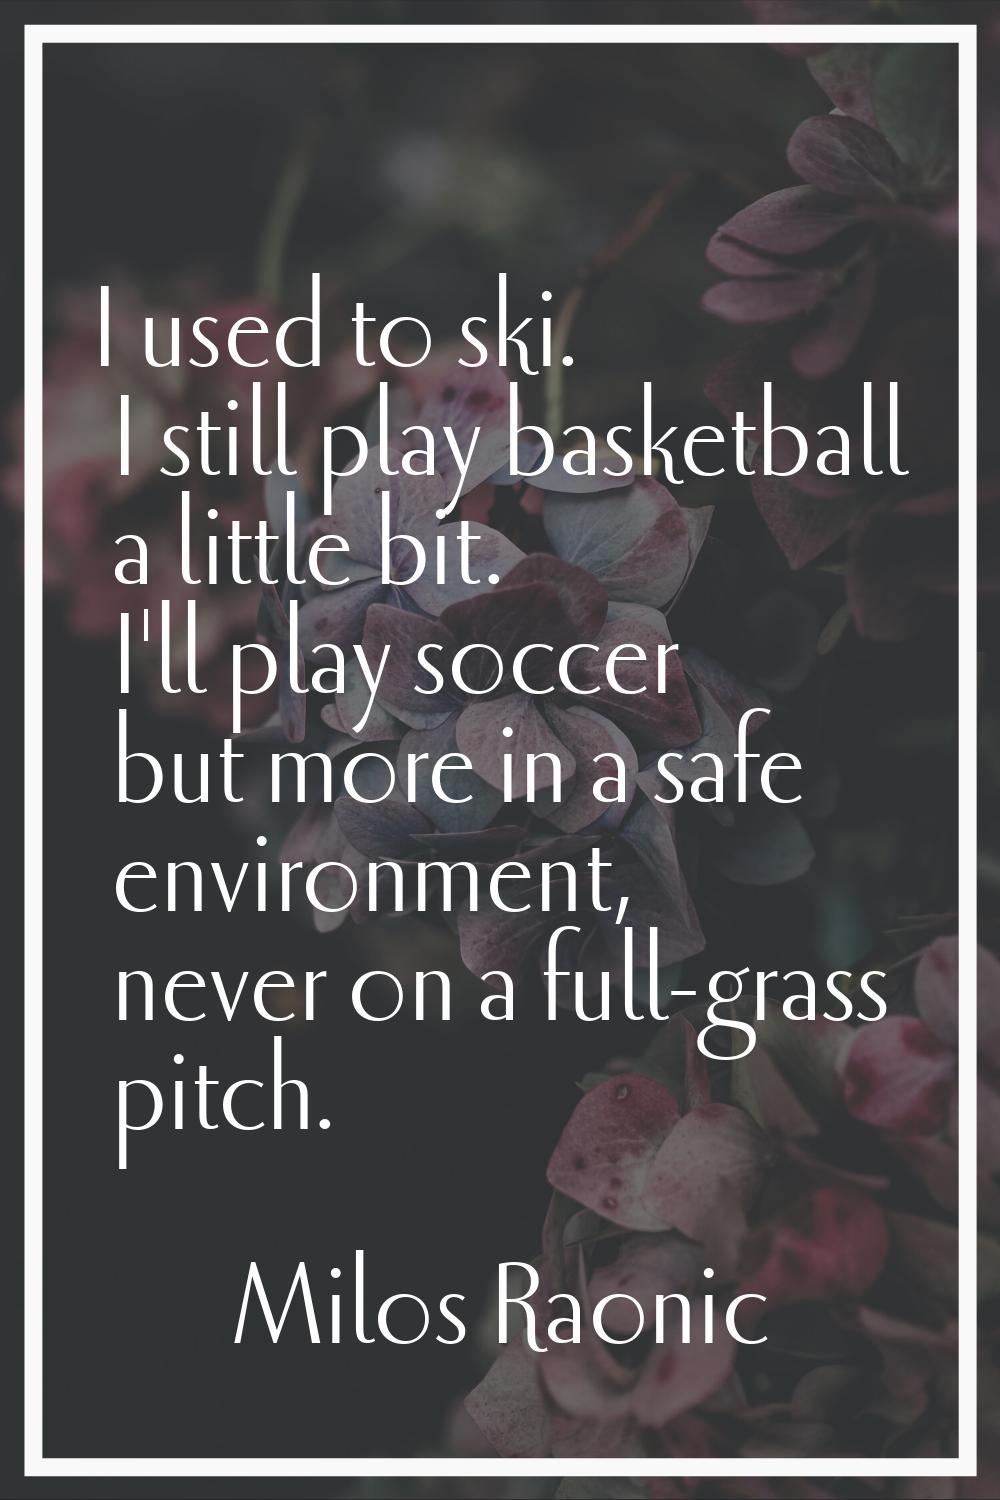 I used to ski. I still play basketball a little bit. I'll play soccer but more in a safe environmen